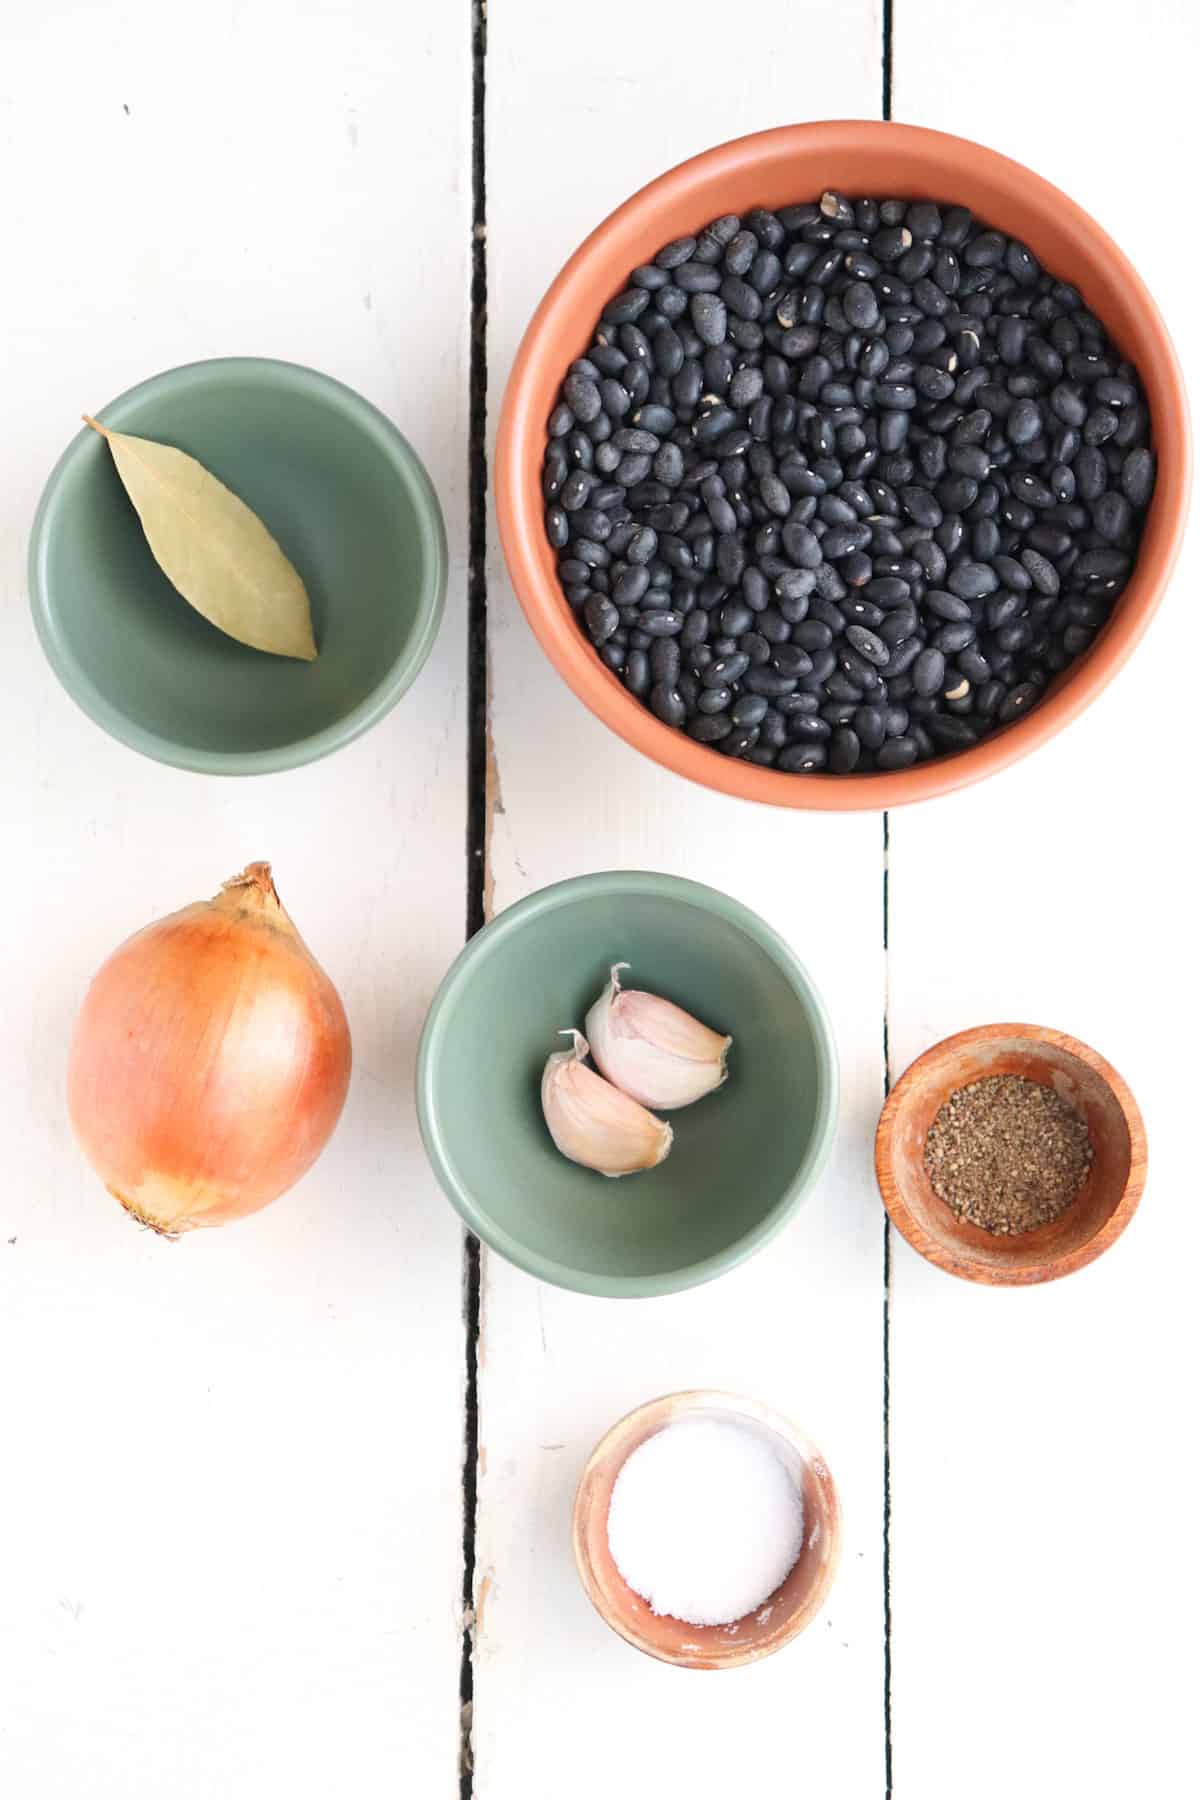 ingredients for instant pot black beans on a white background.